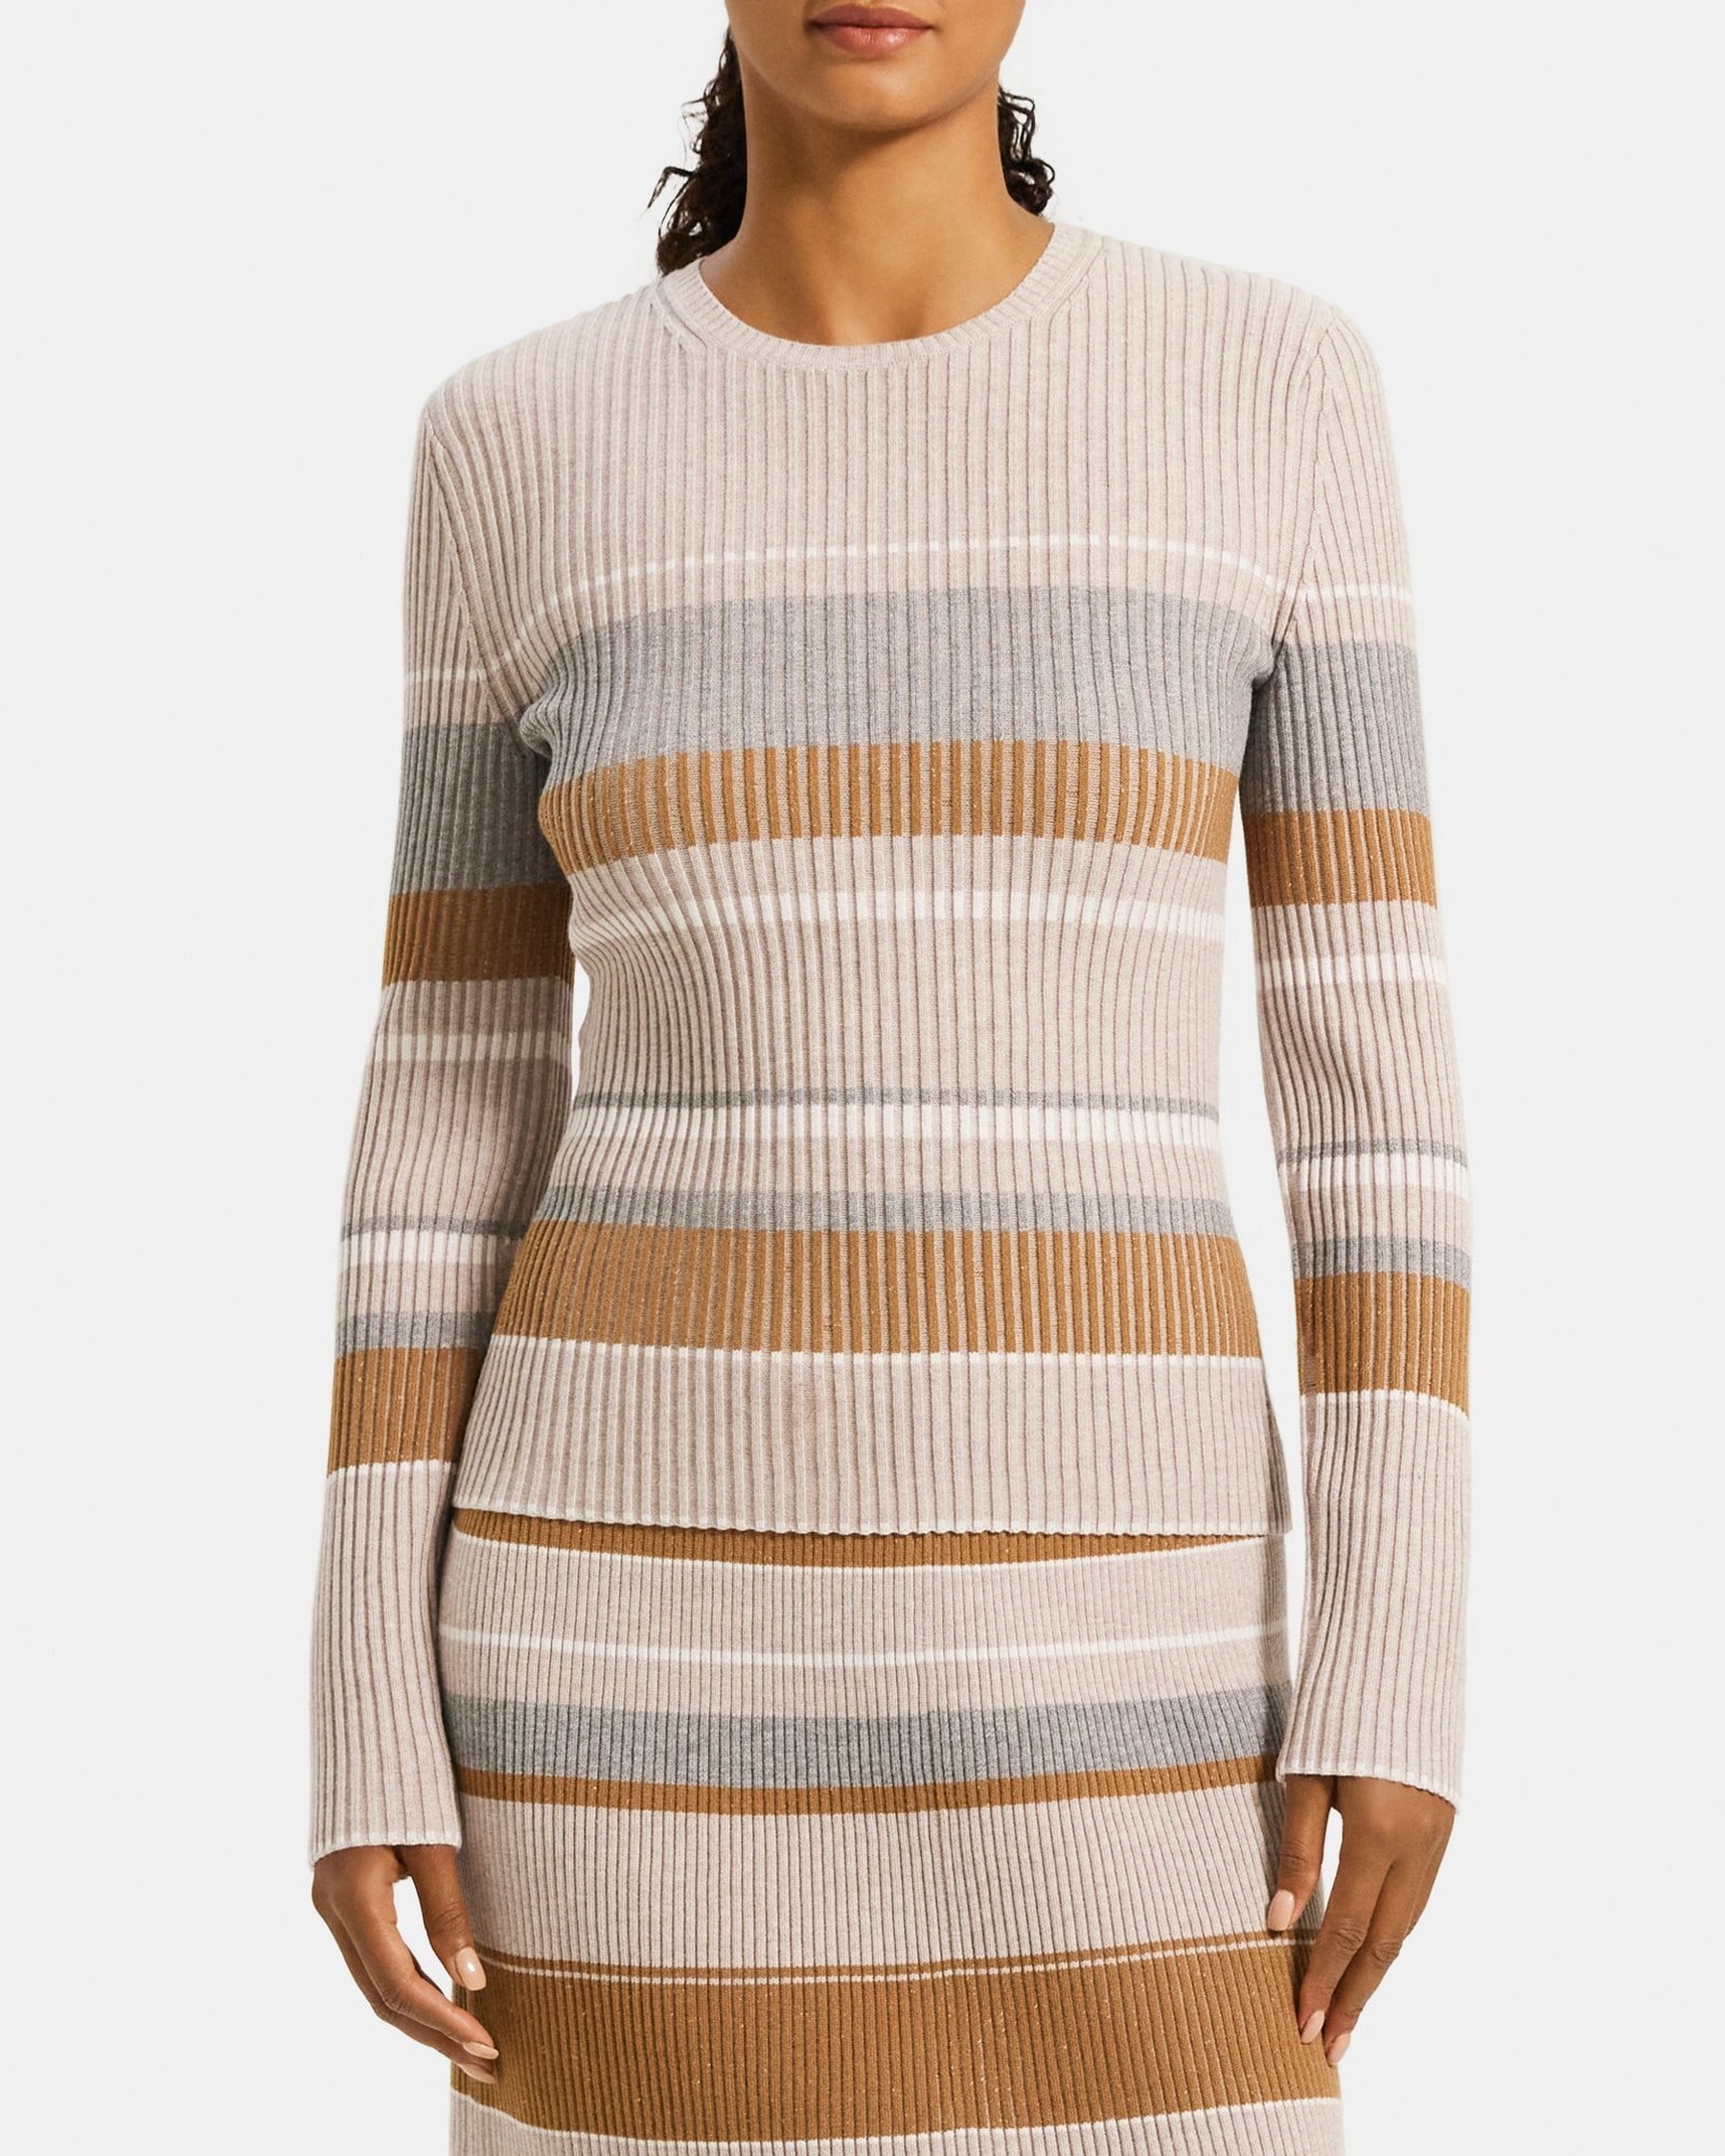 Stretch Viscose Knit Striped Slim-Fit Sweater | Theory Outlet